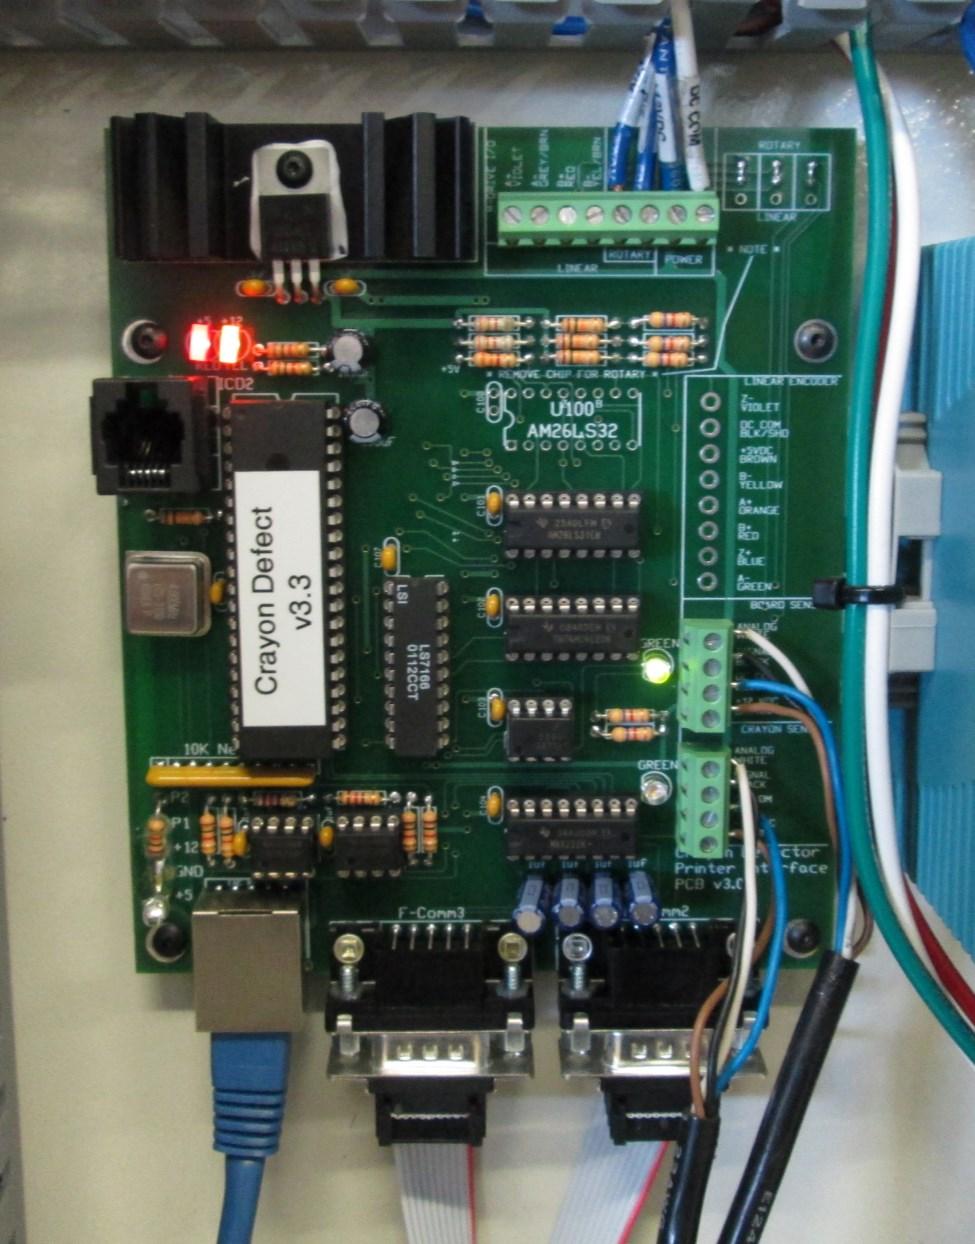 If it is checked, run a board and watch the green LED on the printer body.